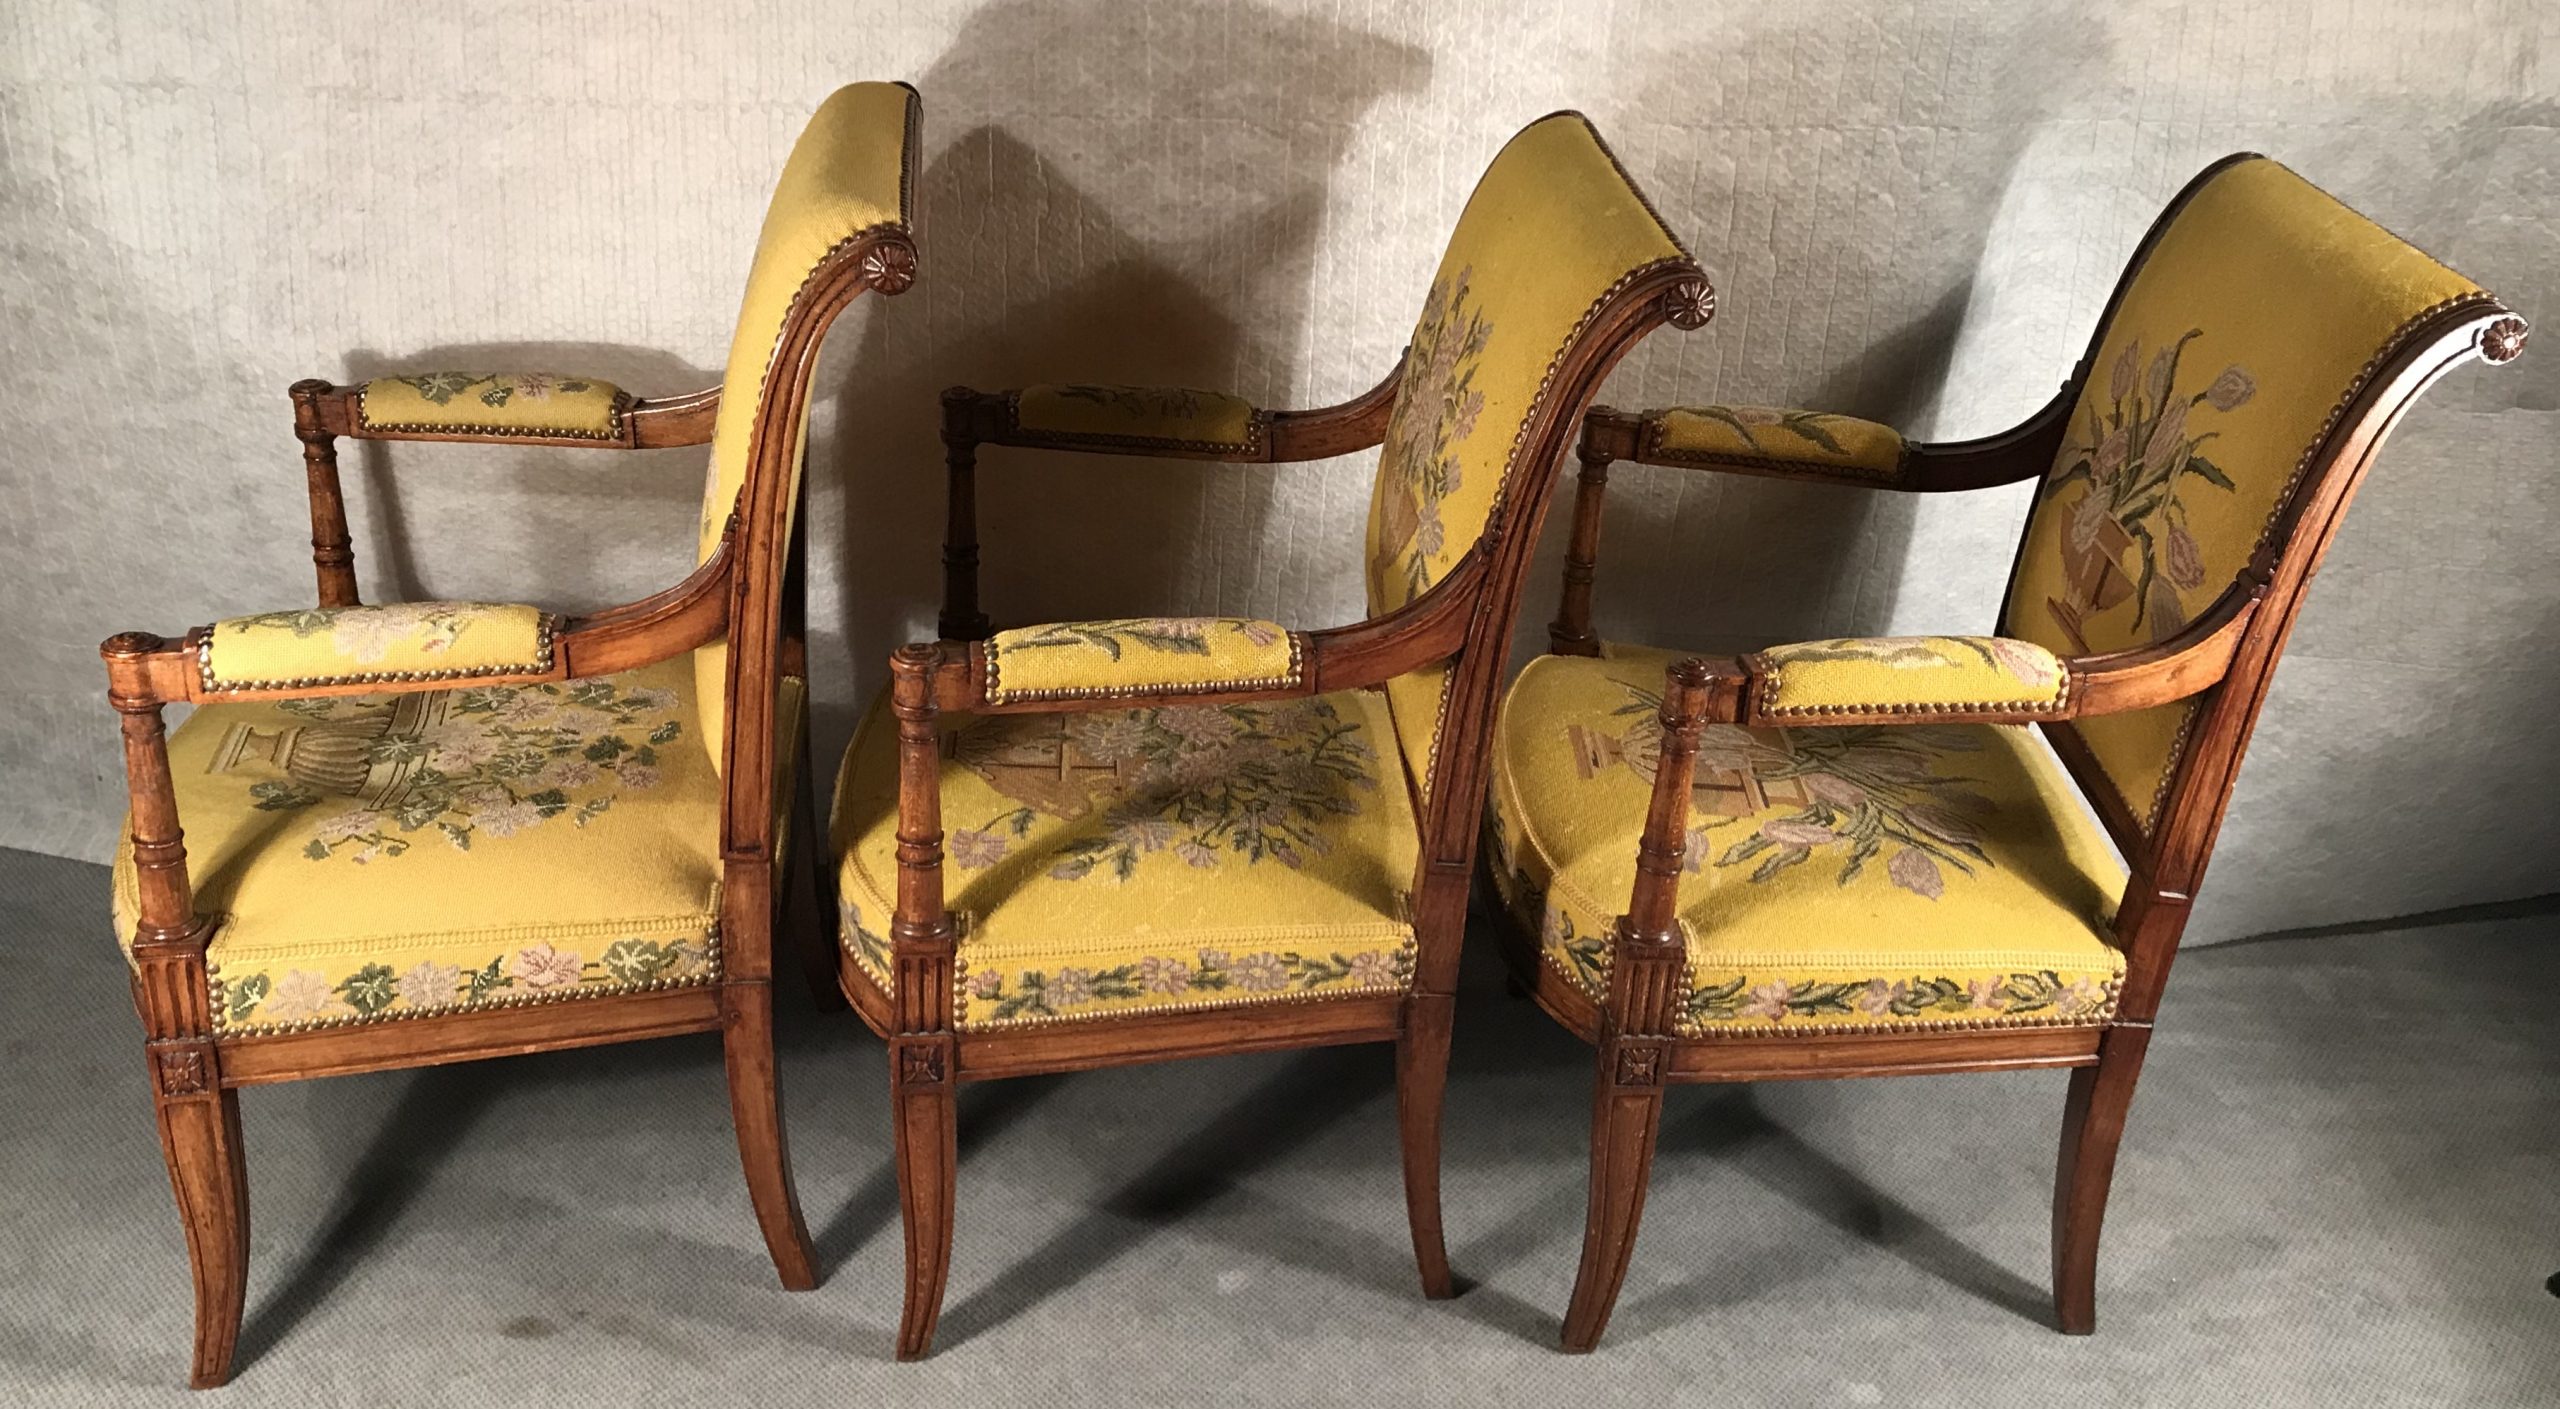 Pair of Louis XV style armchairs, curved armrests and legs, France